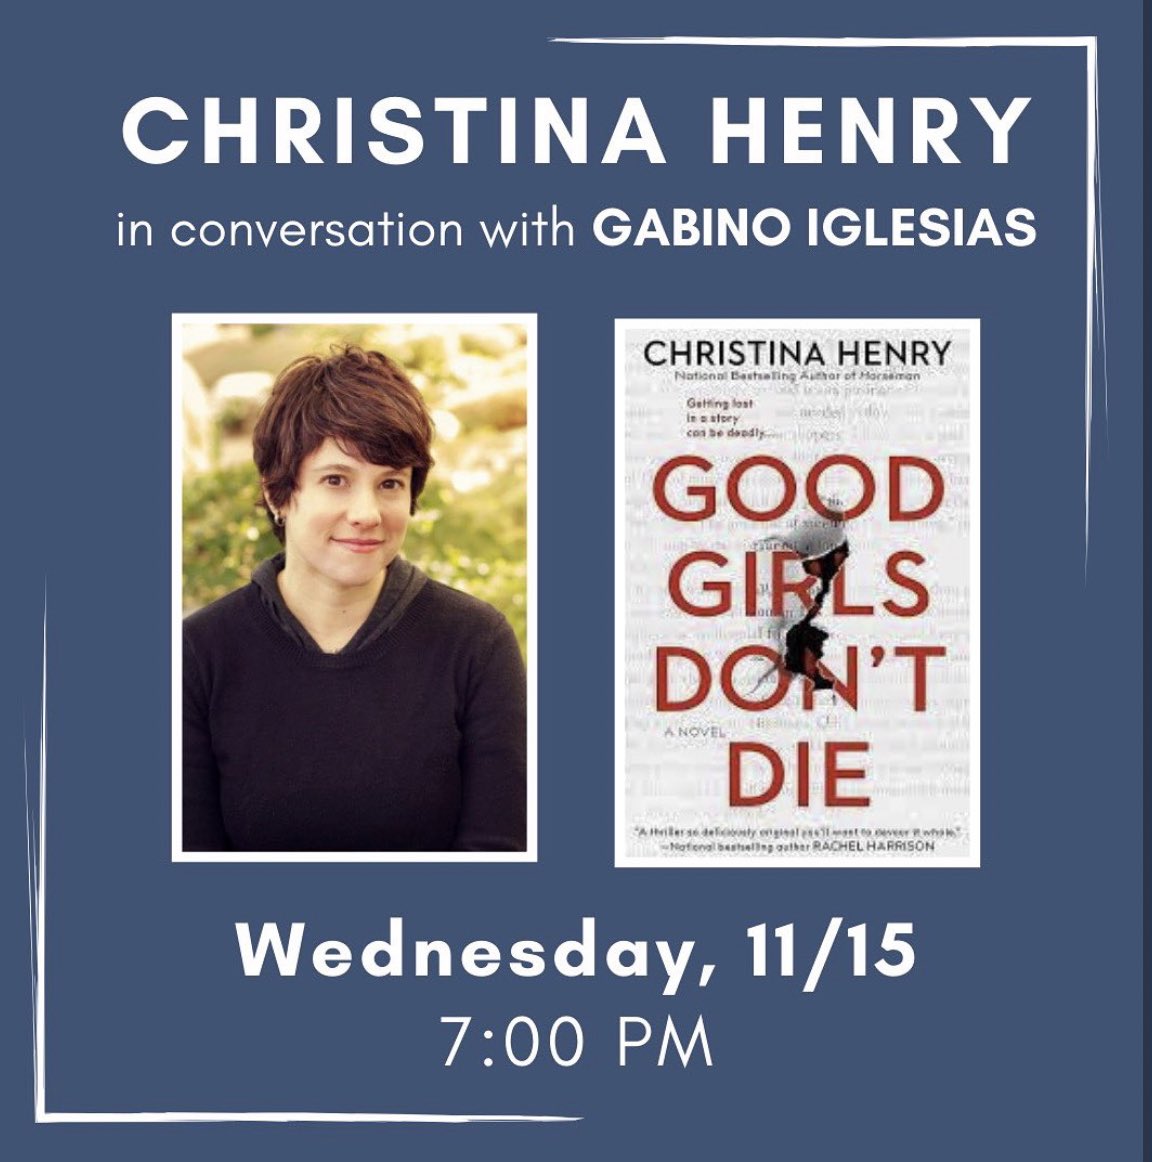 If you’re in Austin tomorrow night, this is the place to be! I’ll be in conversation with the awesome @C_Henry_Author at Vintage Bookstore & Wine Bar.